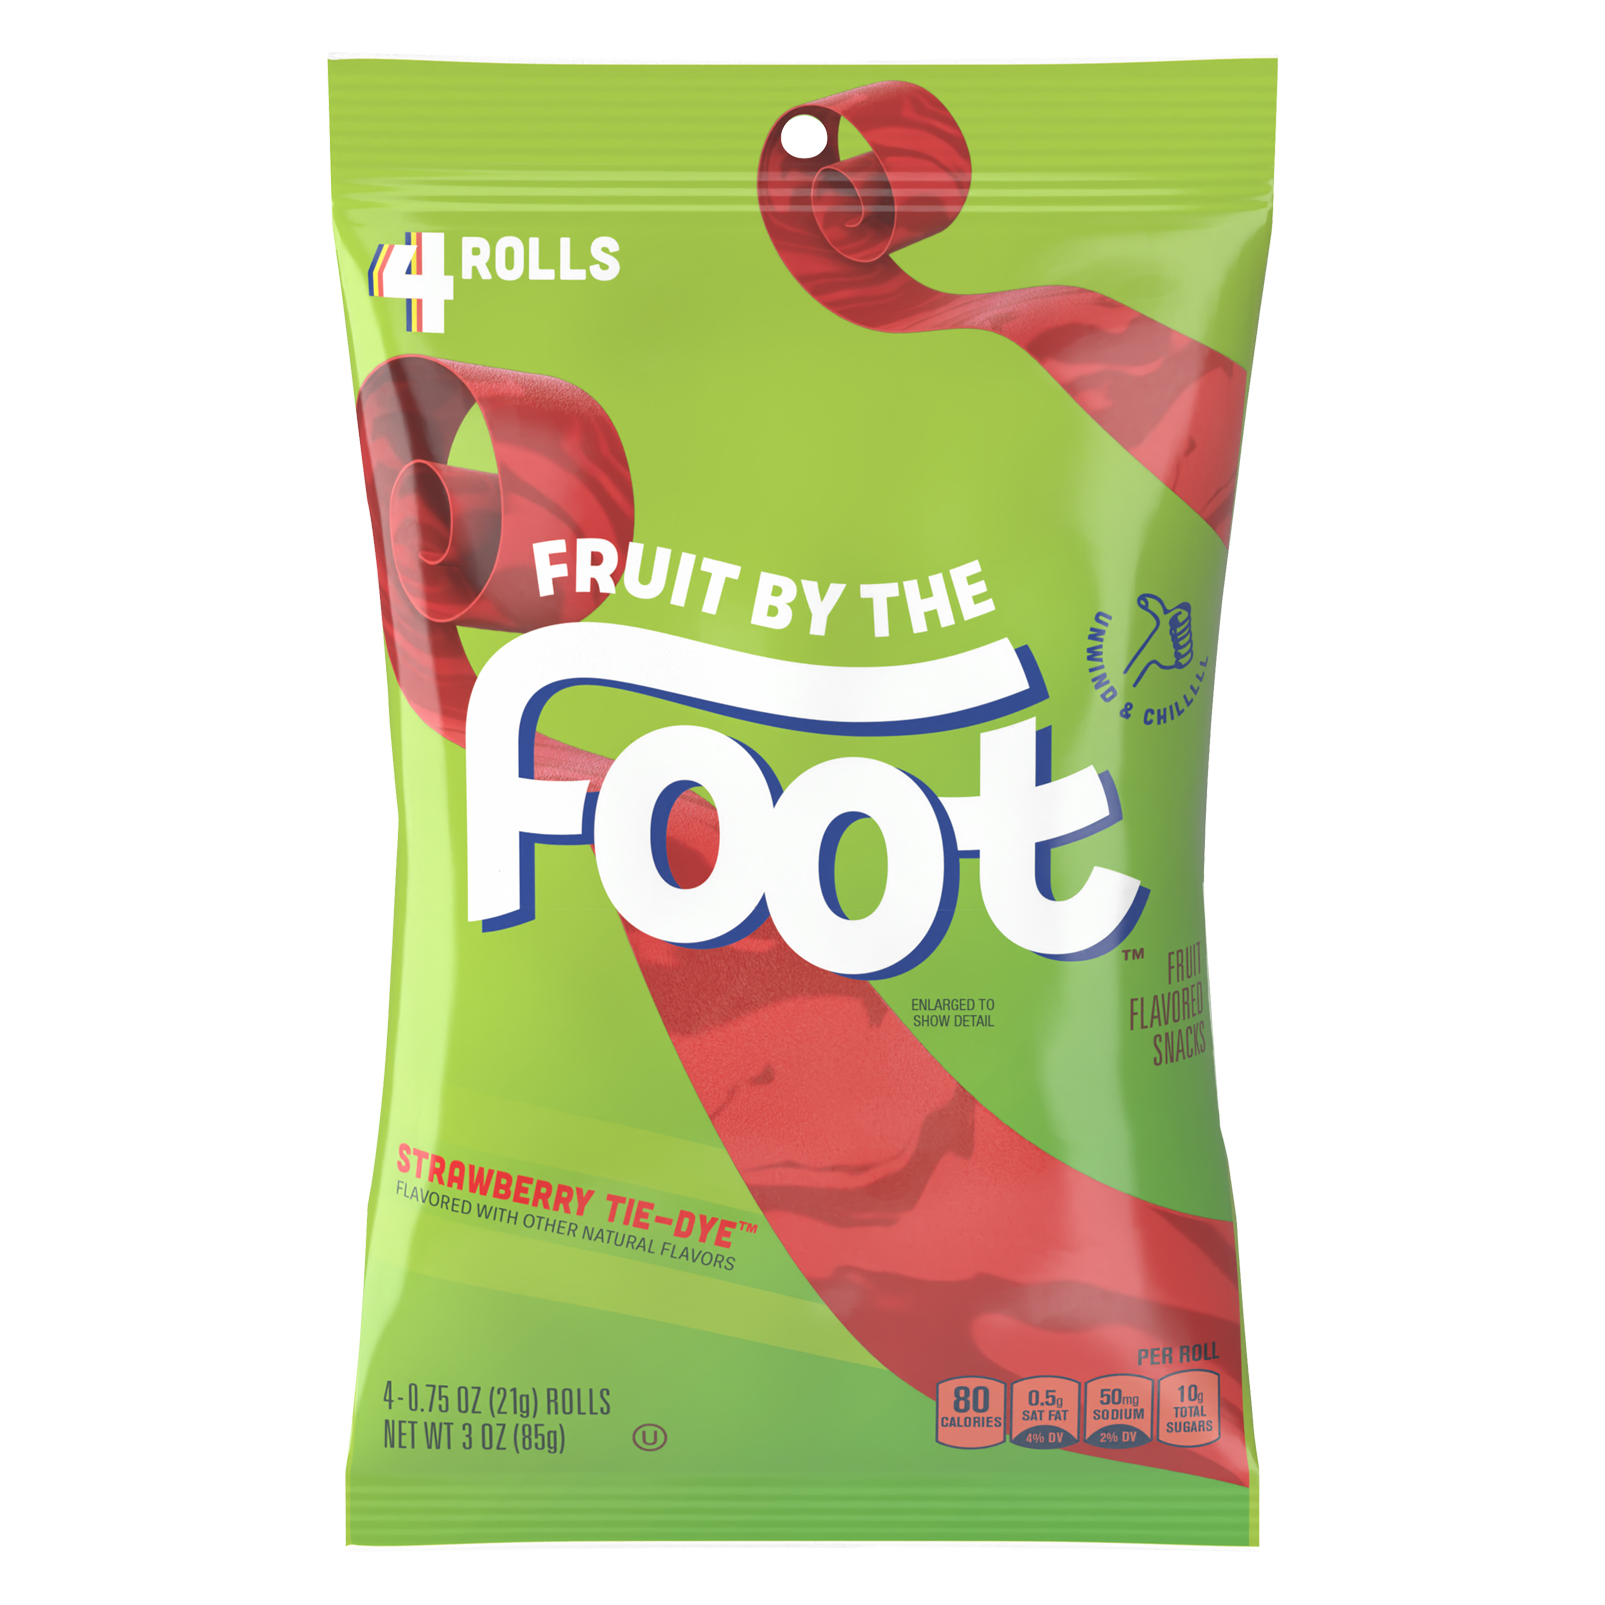 Fruit By the Foot Strawberry Tie-Dye 3oz